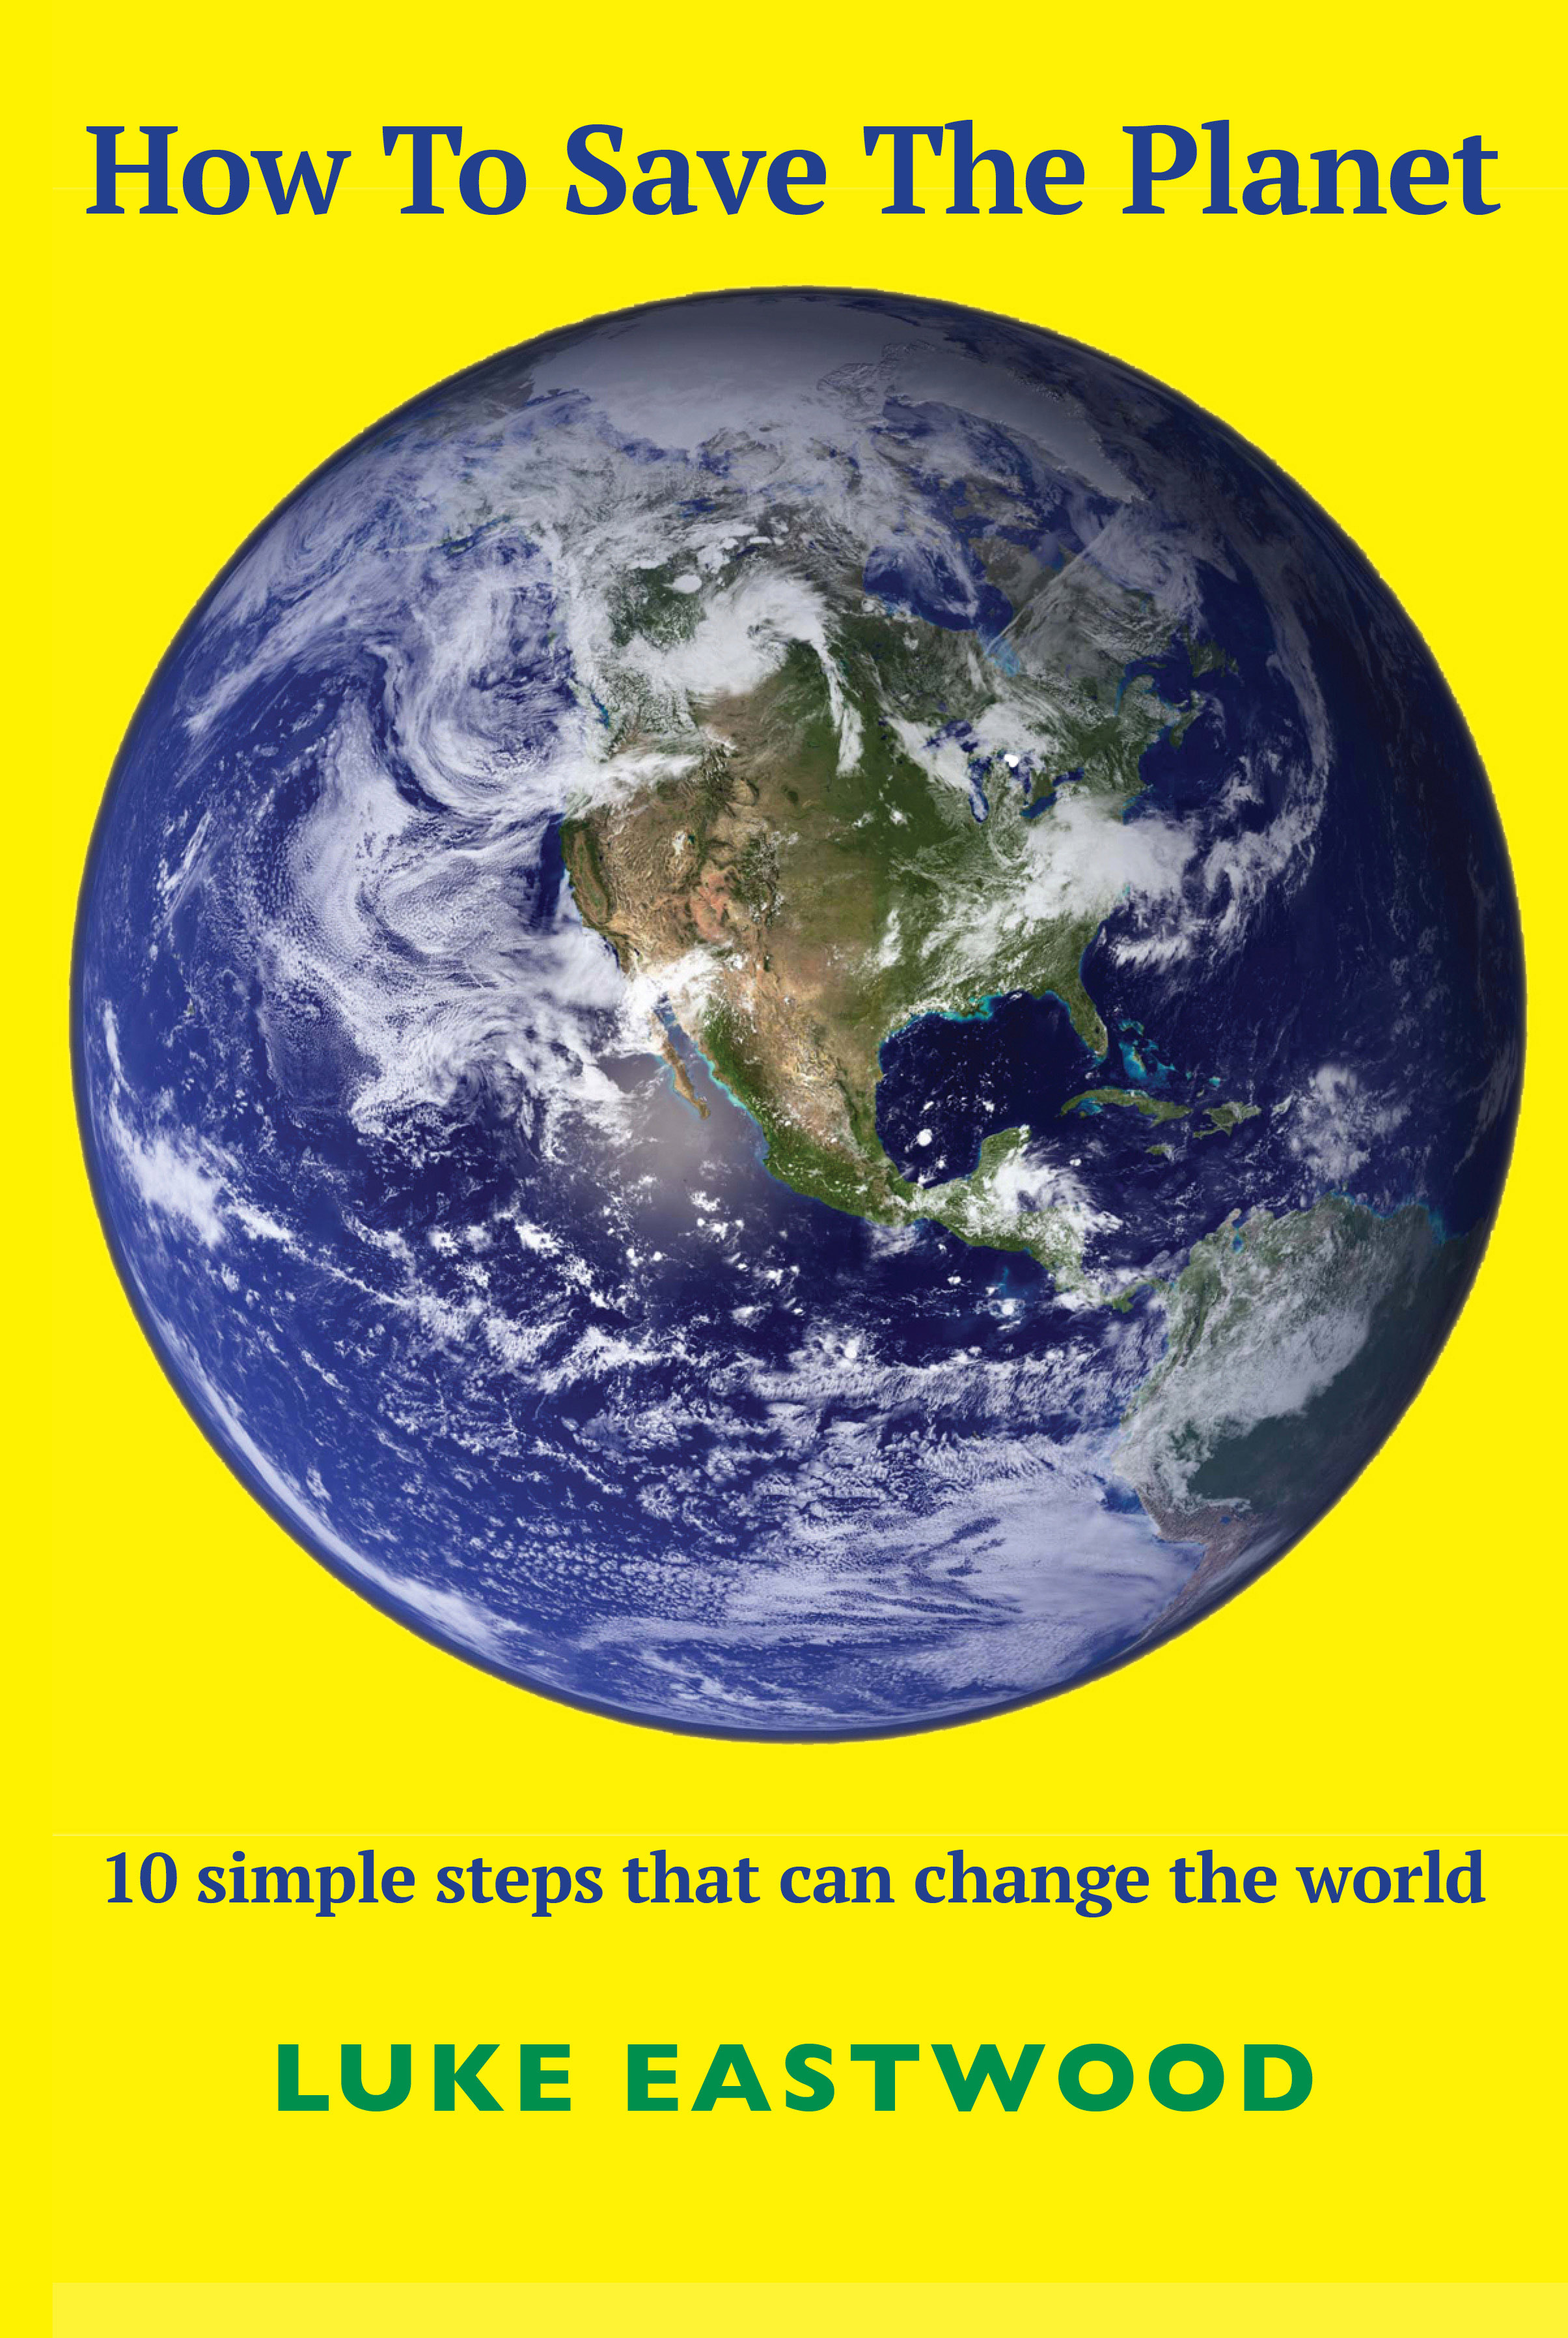 How To Save The Planet, new book by Luke Eastwood